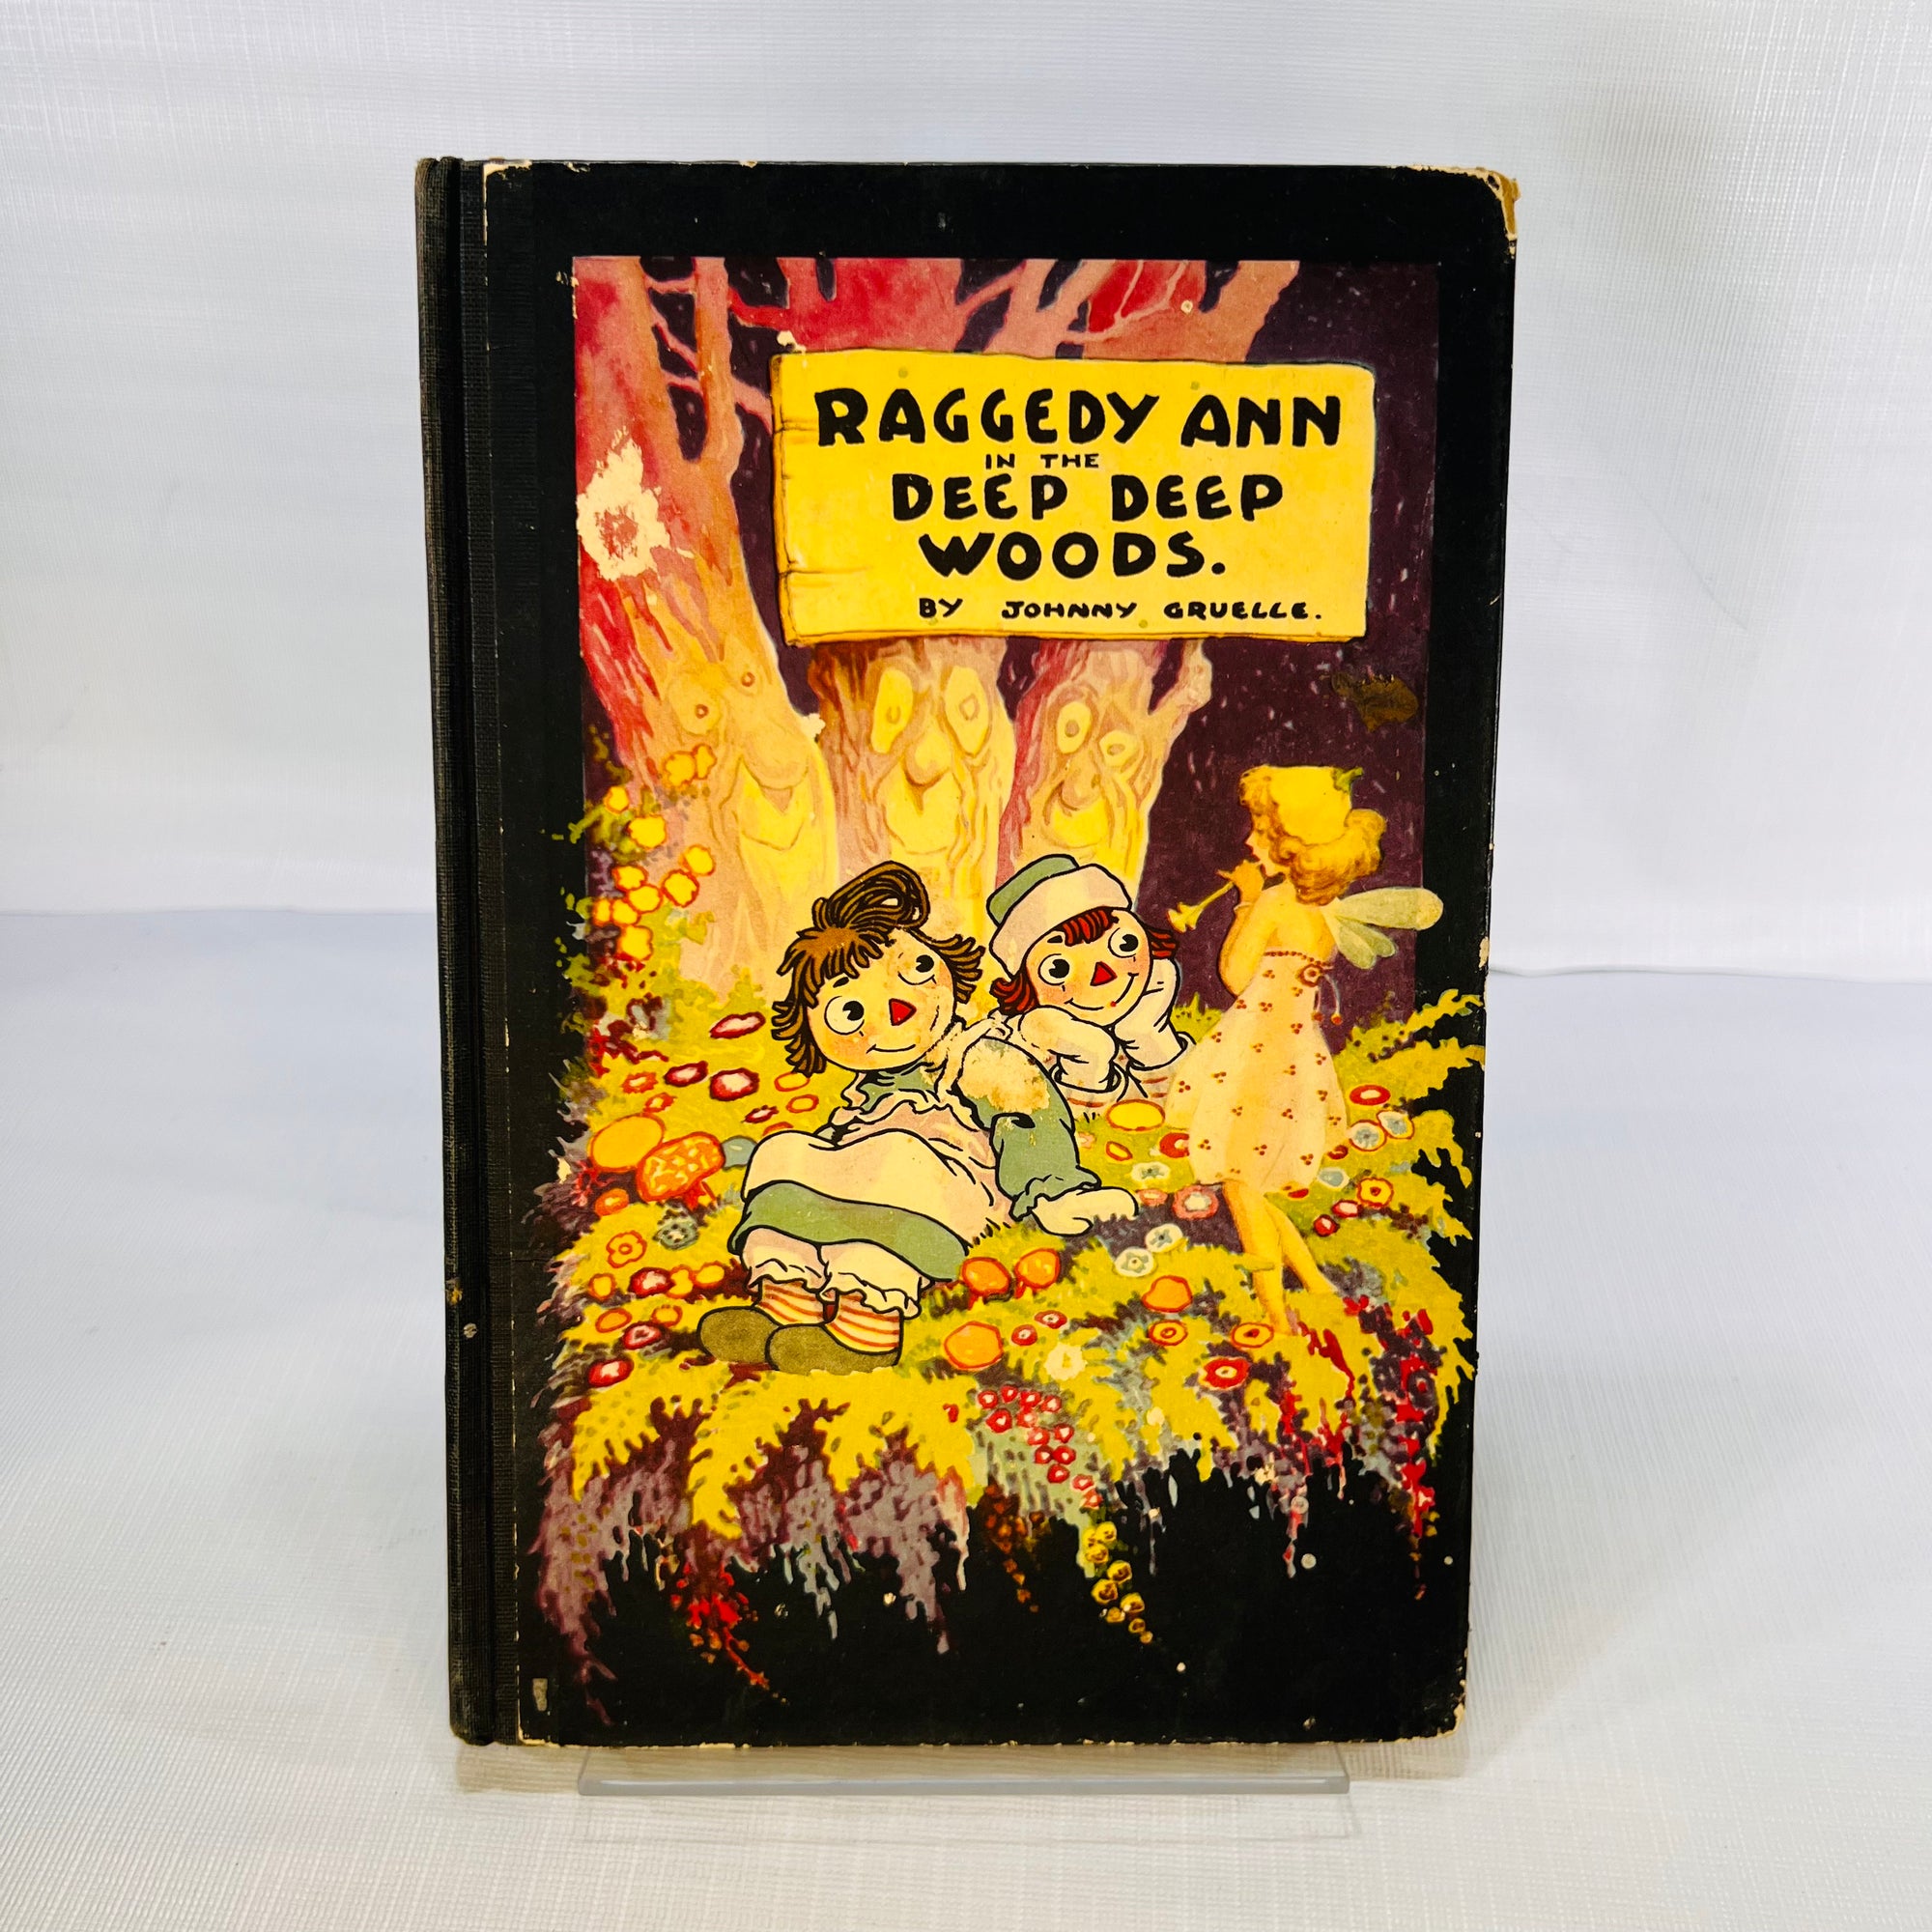 Raggedy Ann in the Deep Woods written and  illustrated by Johnny Gruelle 1930 M. A. Donohue & Company